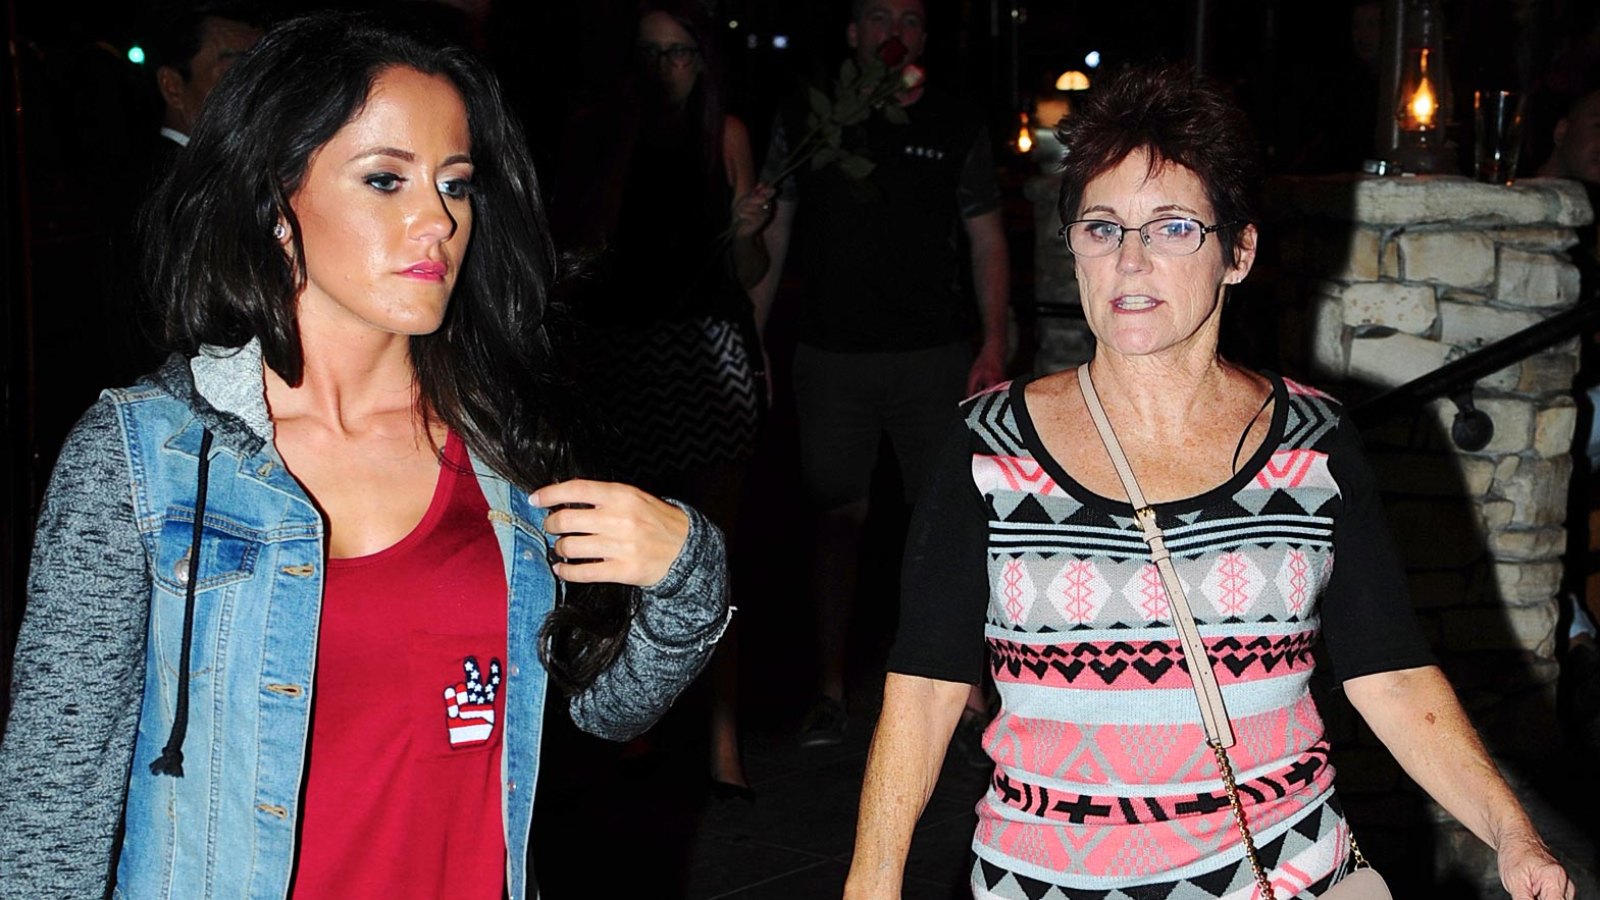 spl1113063_018 Teen Mom 2 Alum Jenelle Evans Mom Barbara Argue Over Jace s Therapy Meds After His Disappearance 379